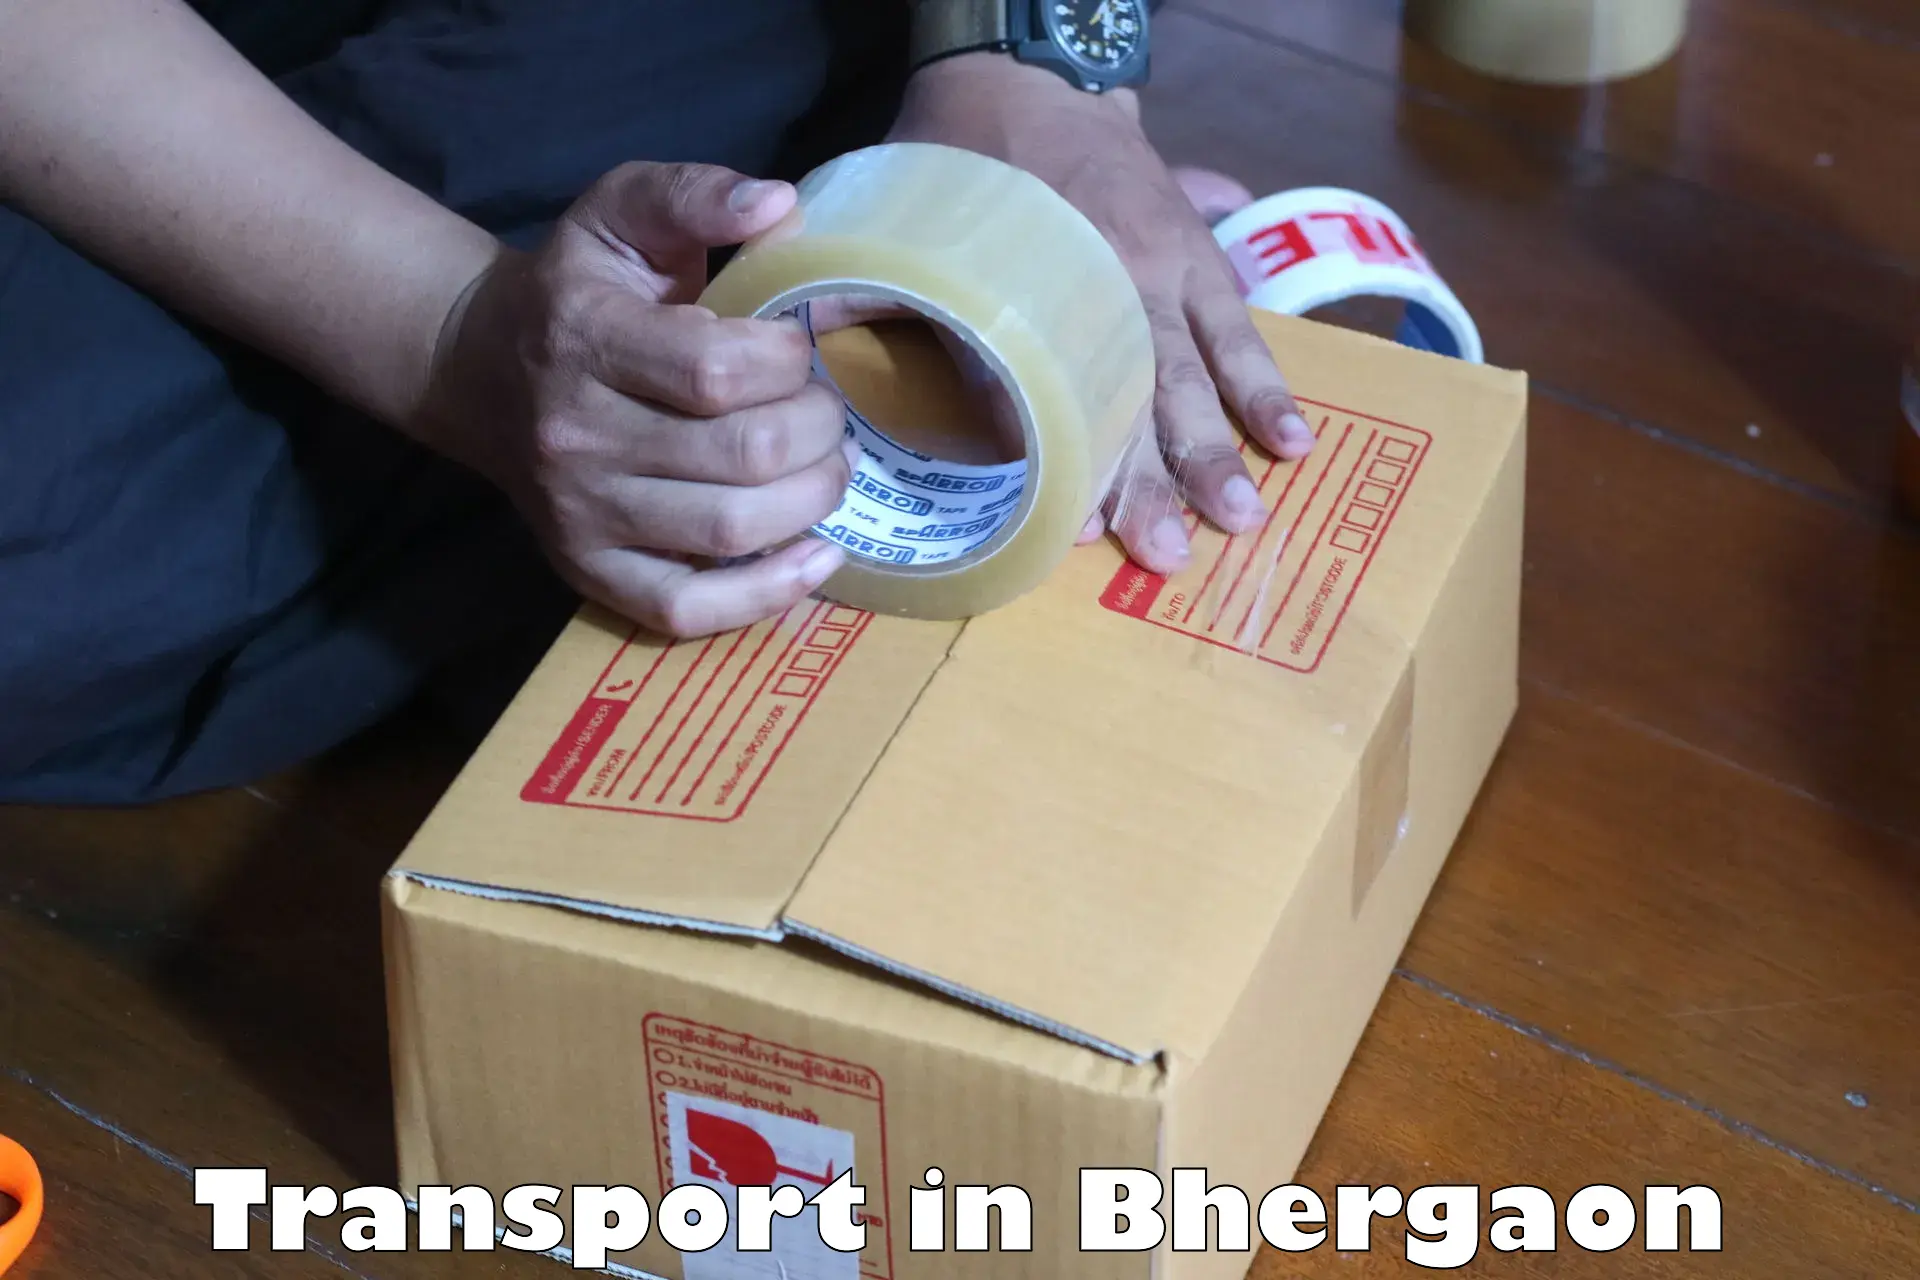 Domestic goods transportation services in Bhergaon